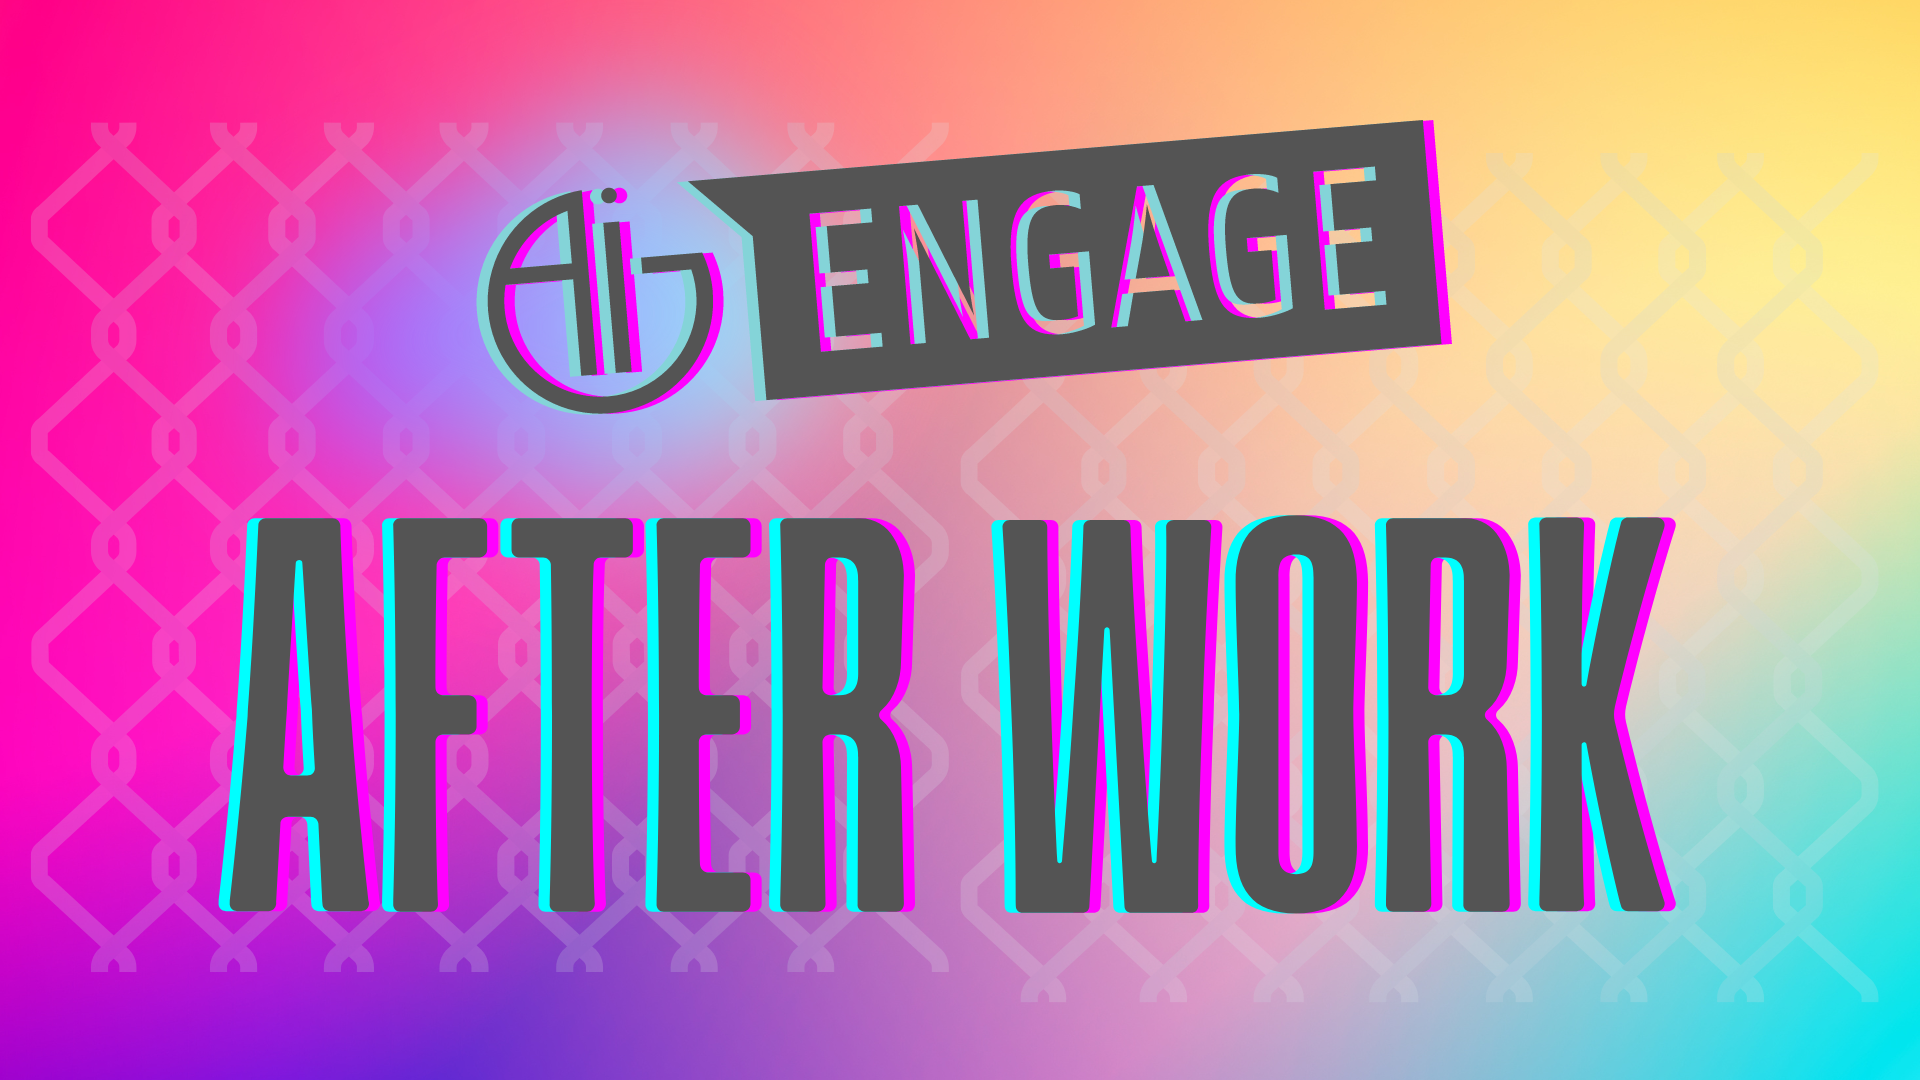 engage after-work